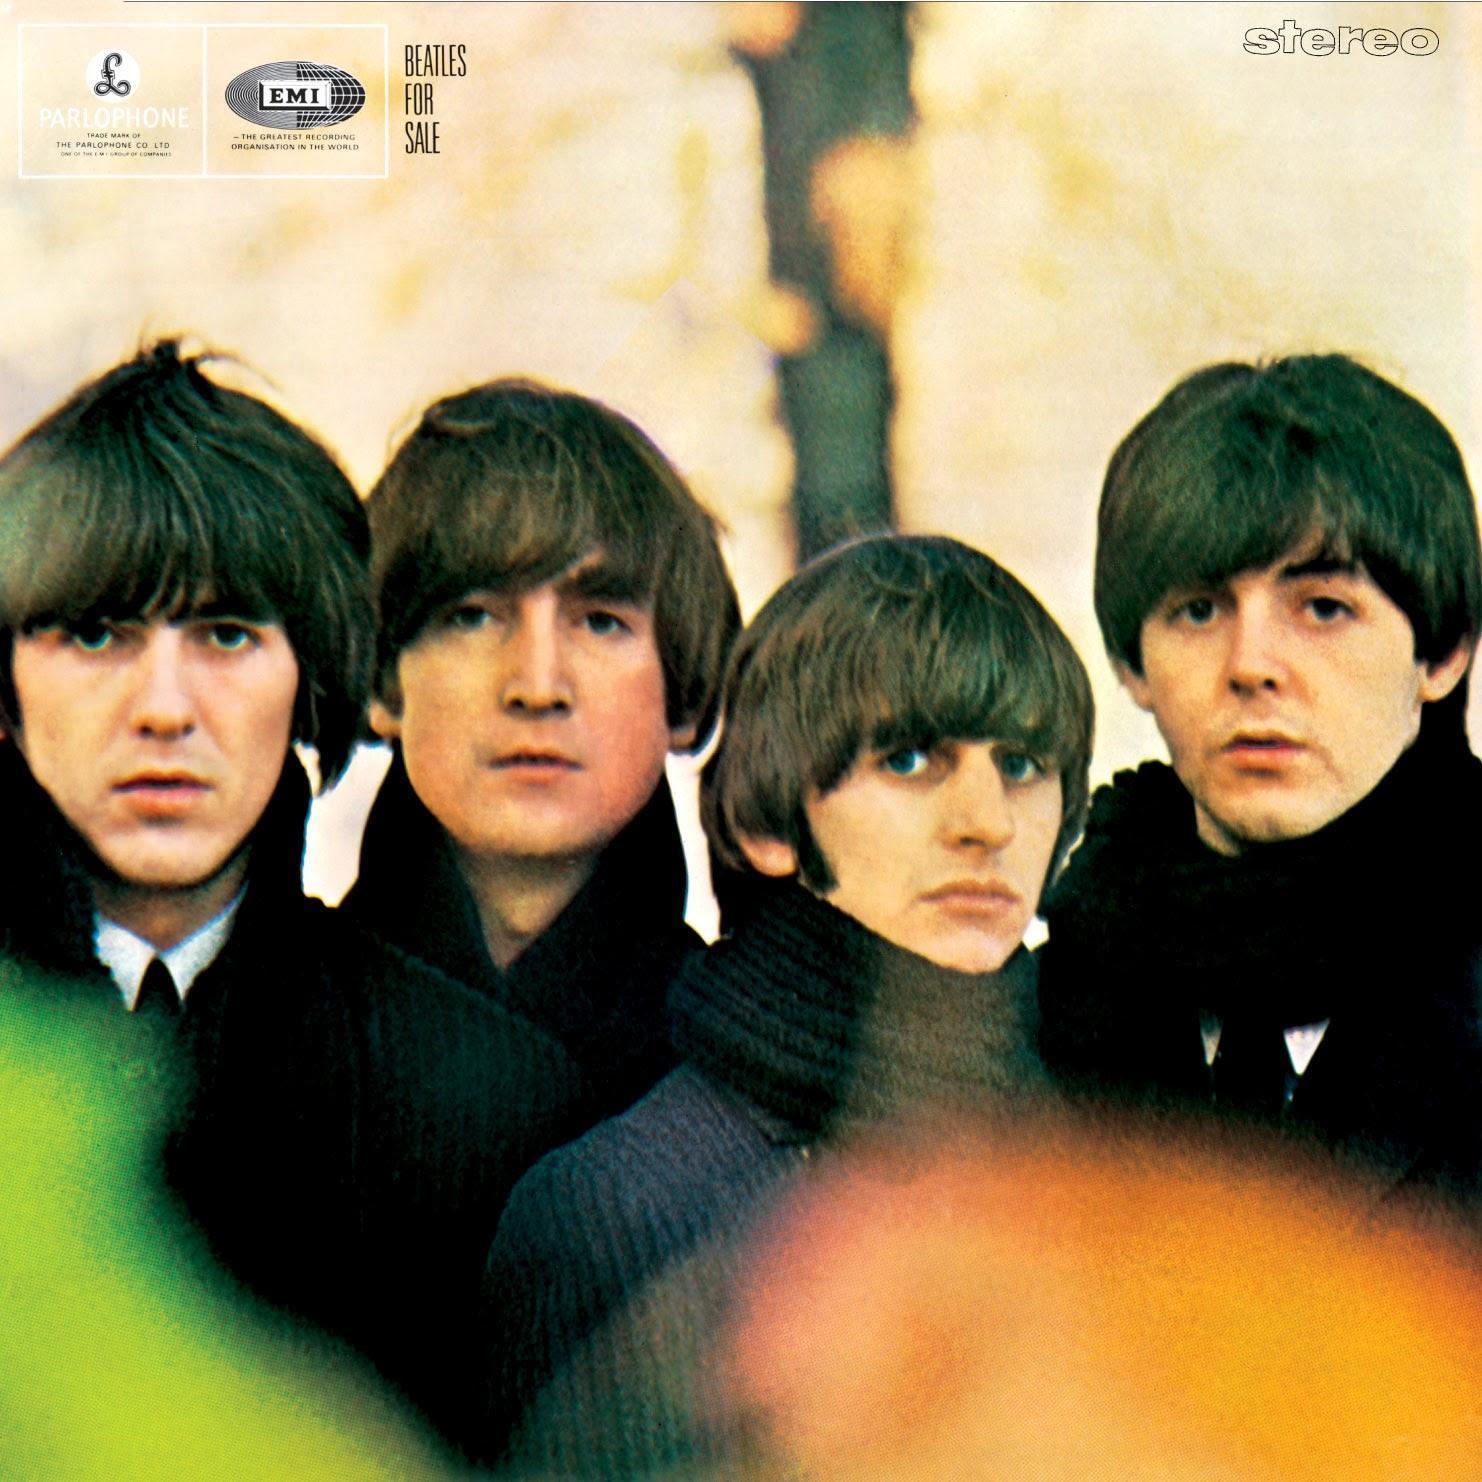 11. Beatles For Sale (1964)